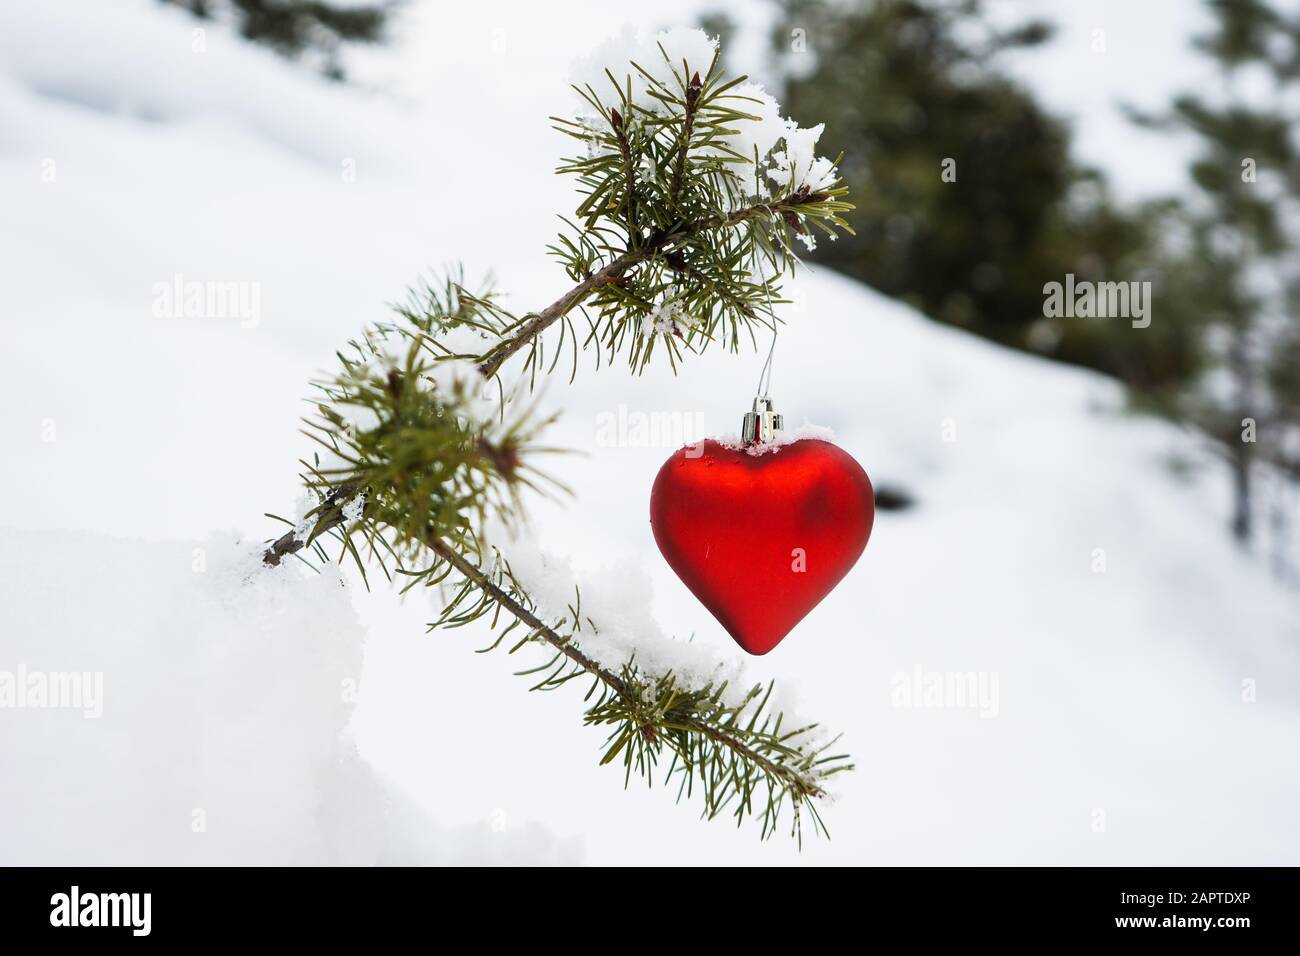 Red heart shaped Christmas ornament hangs on the branch of a snow covered tiny evergreen tree Stock Photo